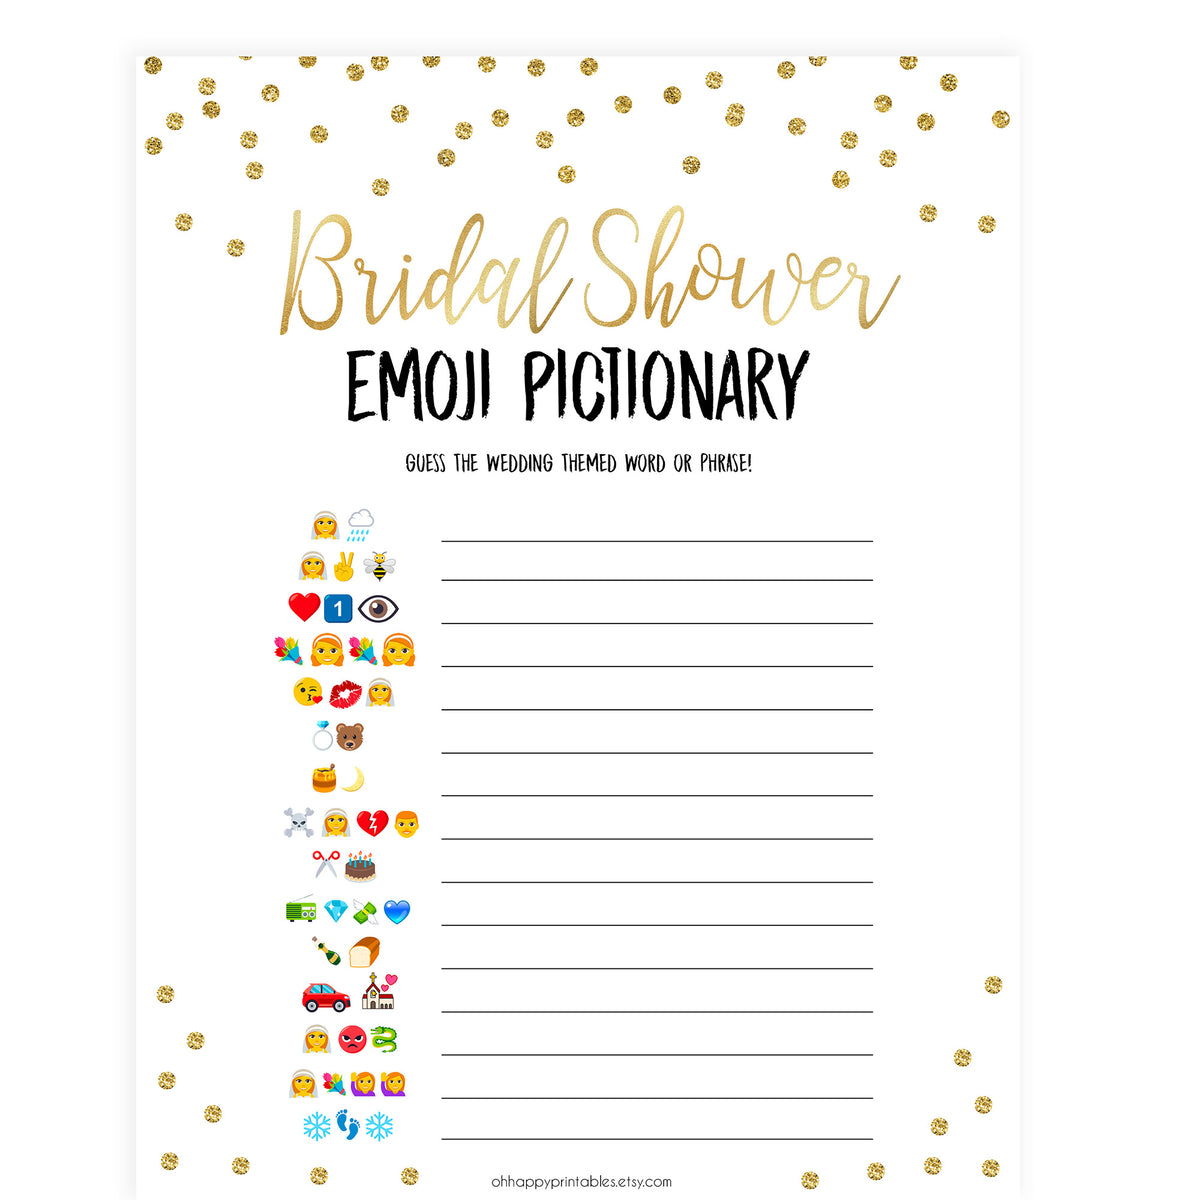 download-printable-emoji-pictionary-images-printables-collection